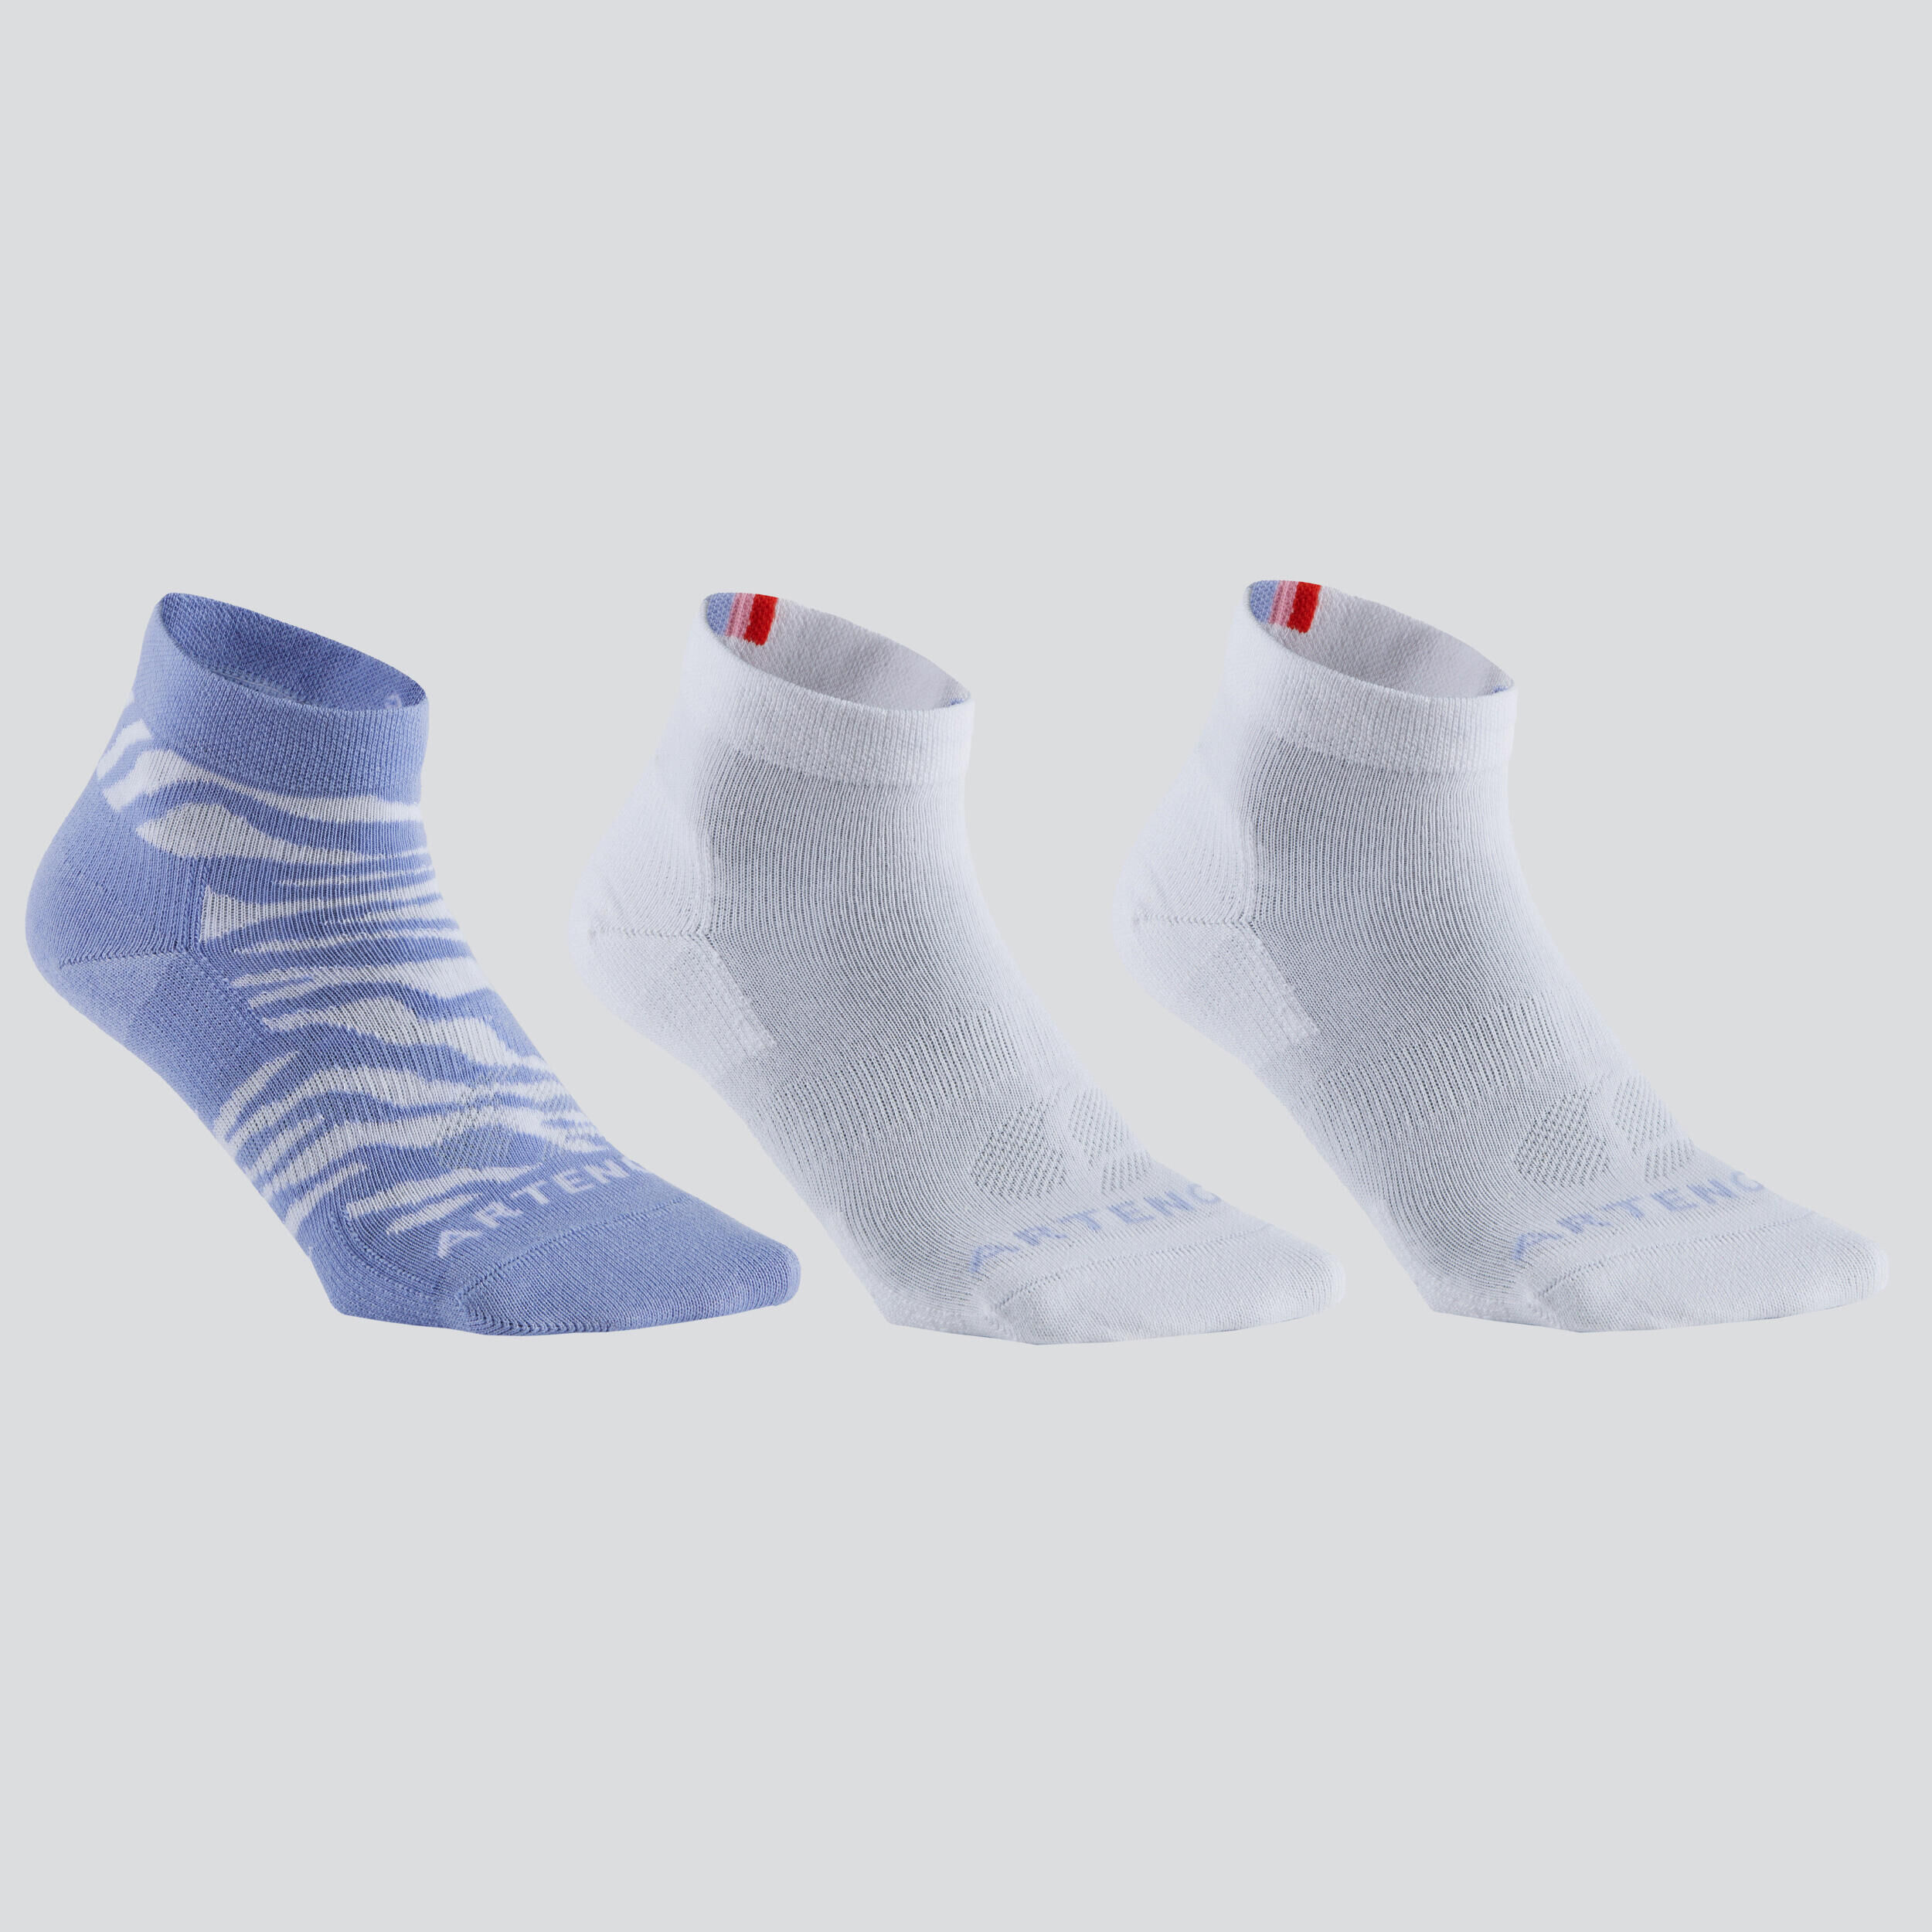 ARTENGO Mid Sports Socks RS 160 Tri-Pack - Purple and White Patterns